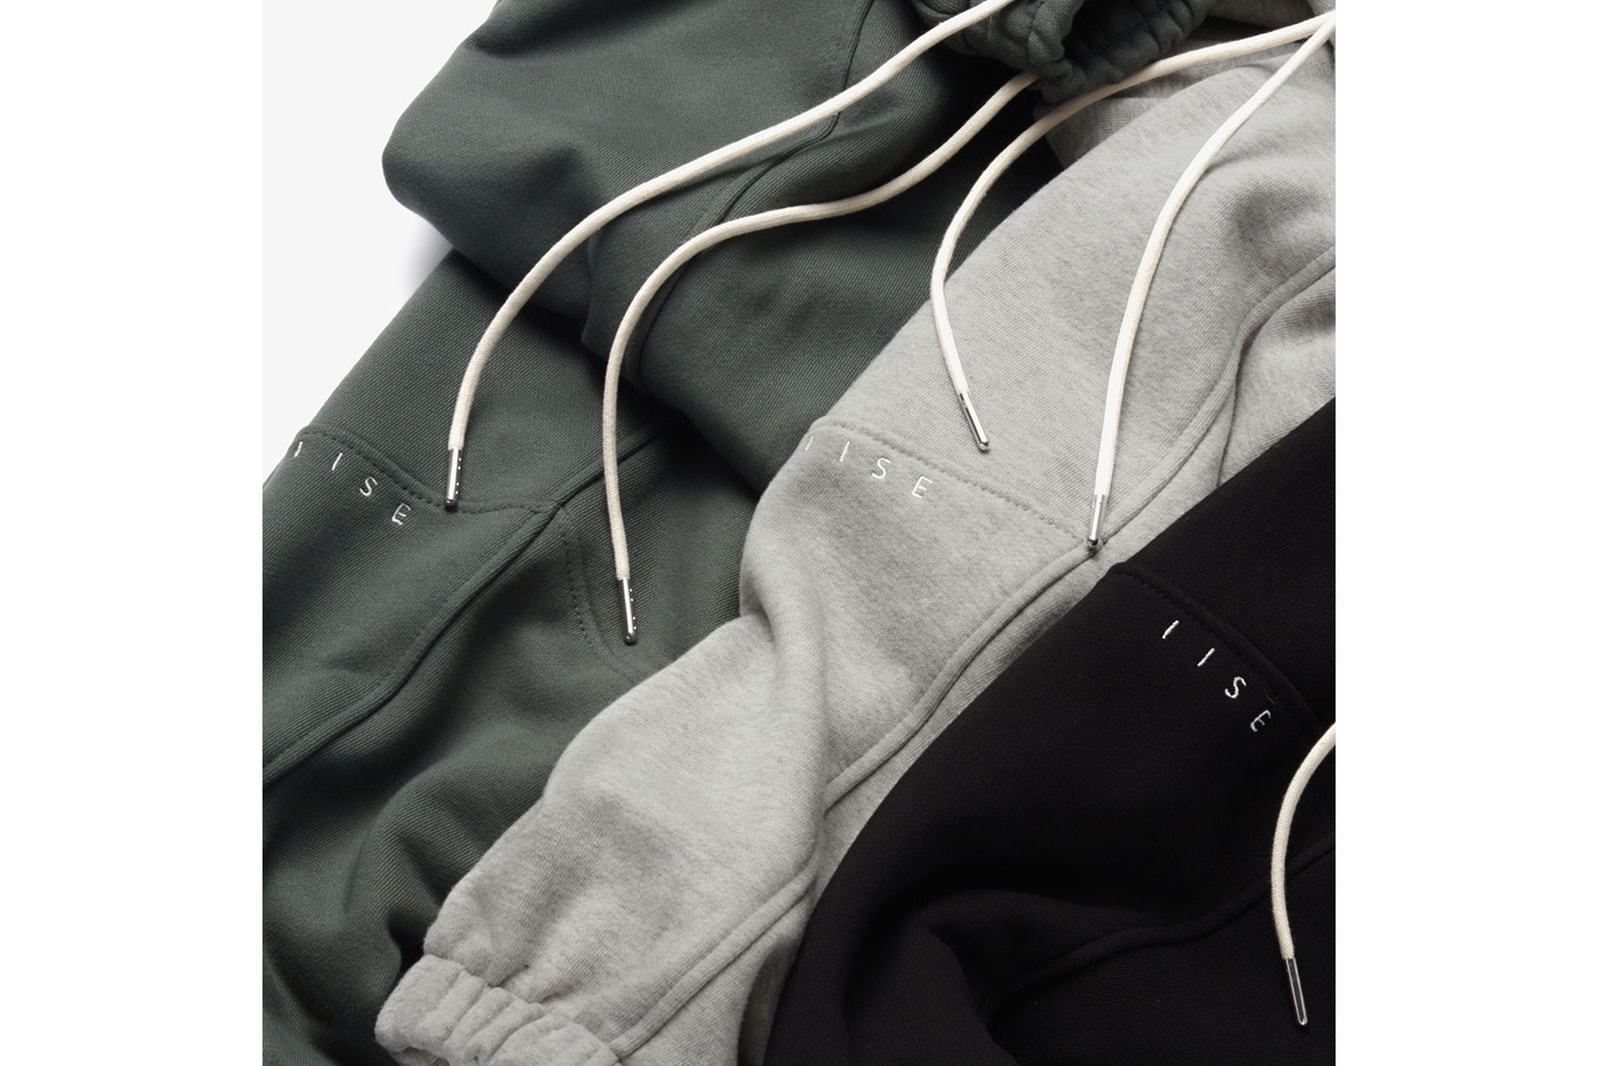 iise essentials hoodies sweats pants hats accessories bags fall winter release